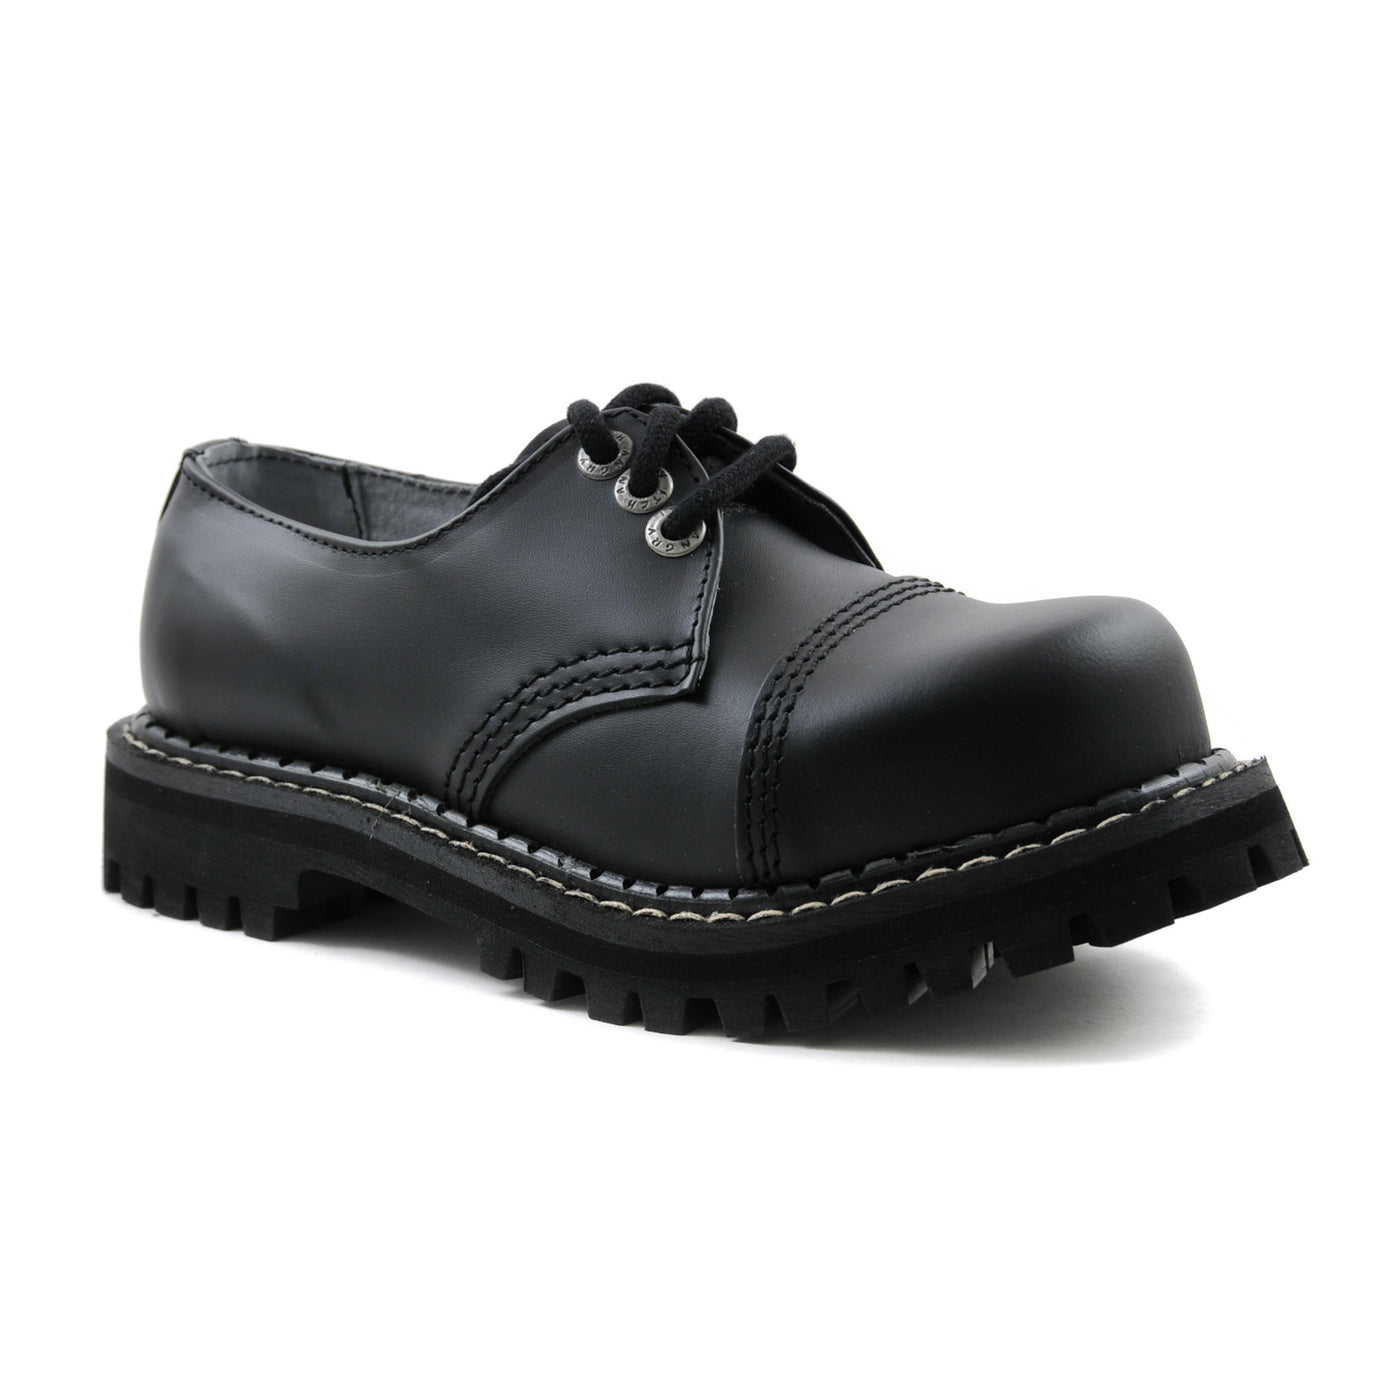 Angry Itch 3 Eyelet Shoes with Steel Toe Cap Black Leather